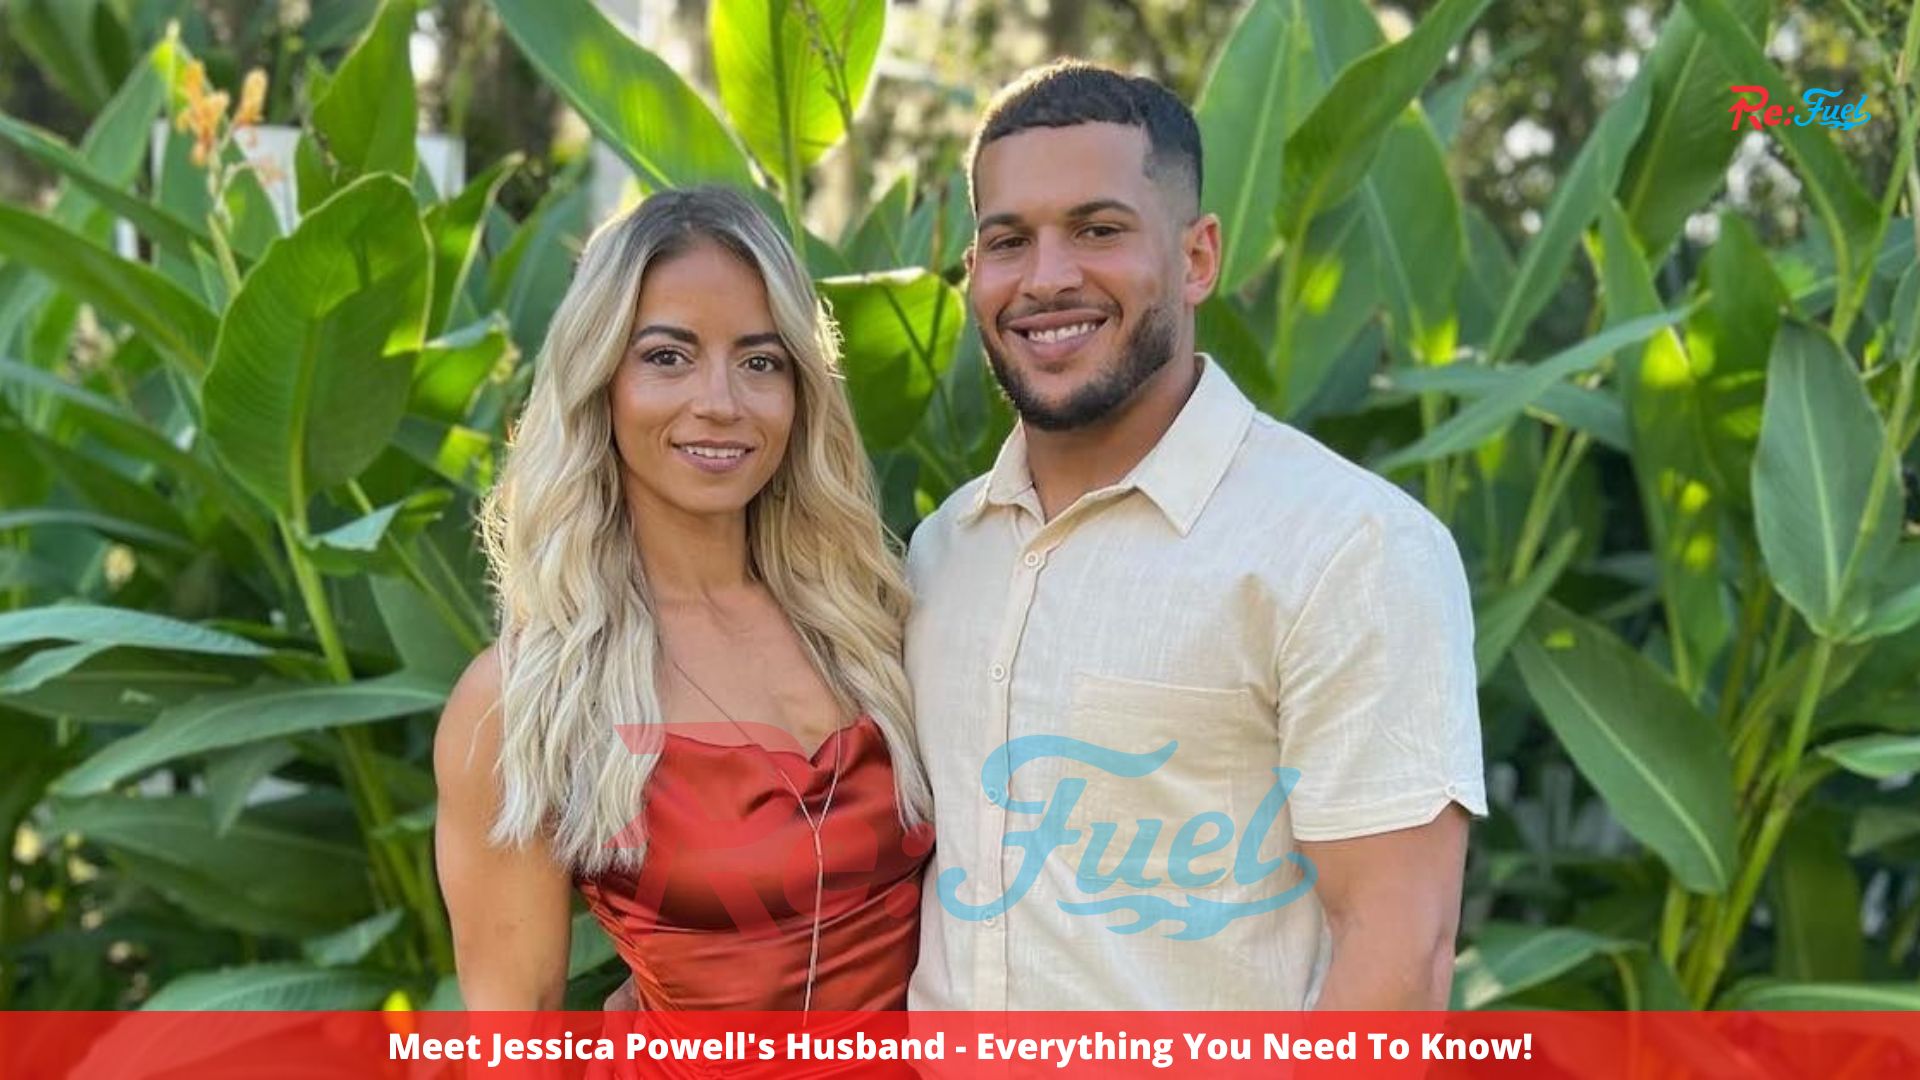 Meet Jessica Powell's Husband - Everything You Need To Know!